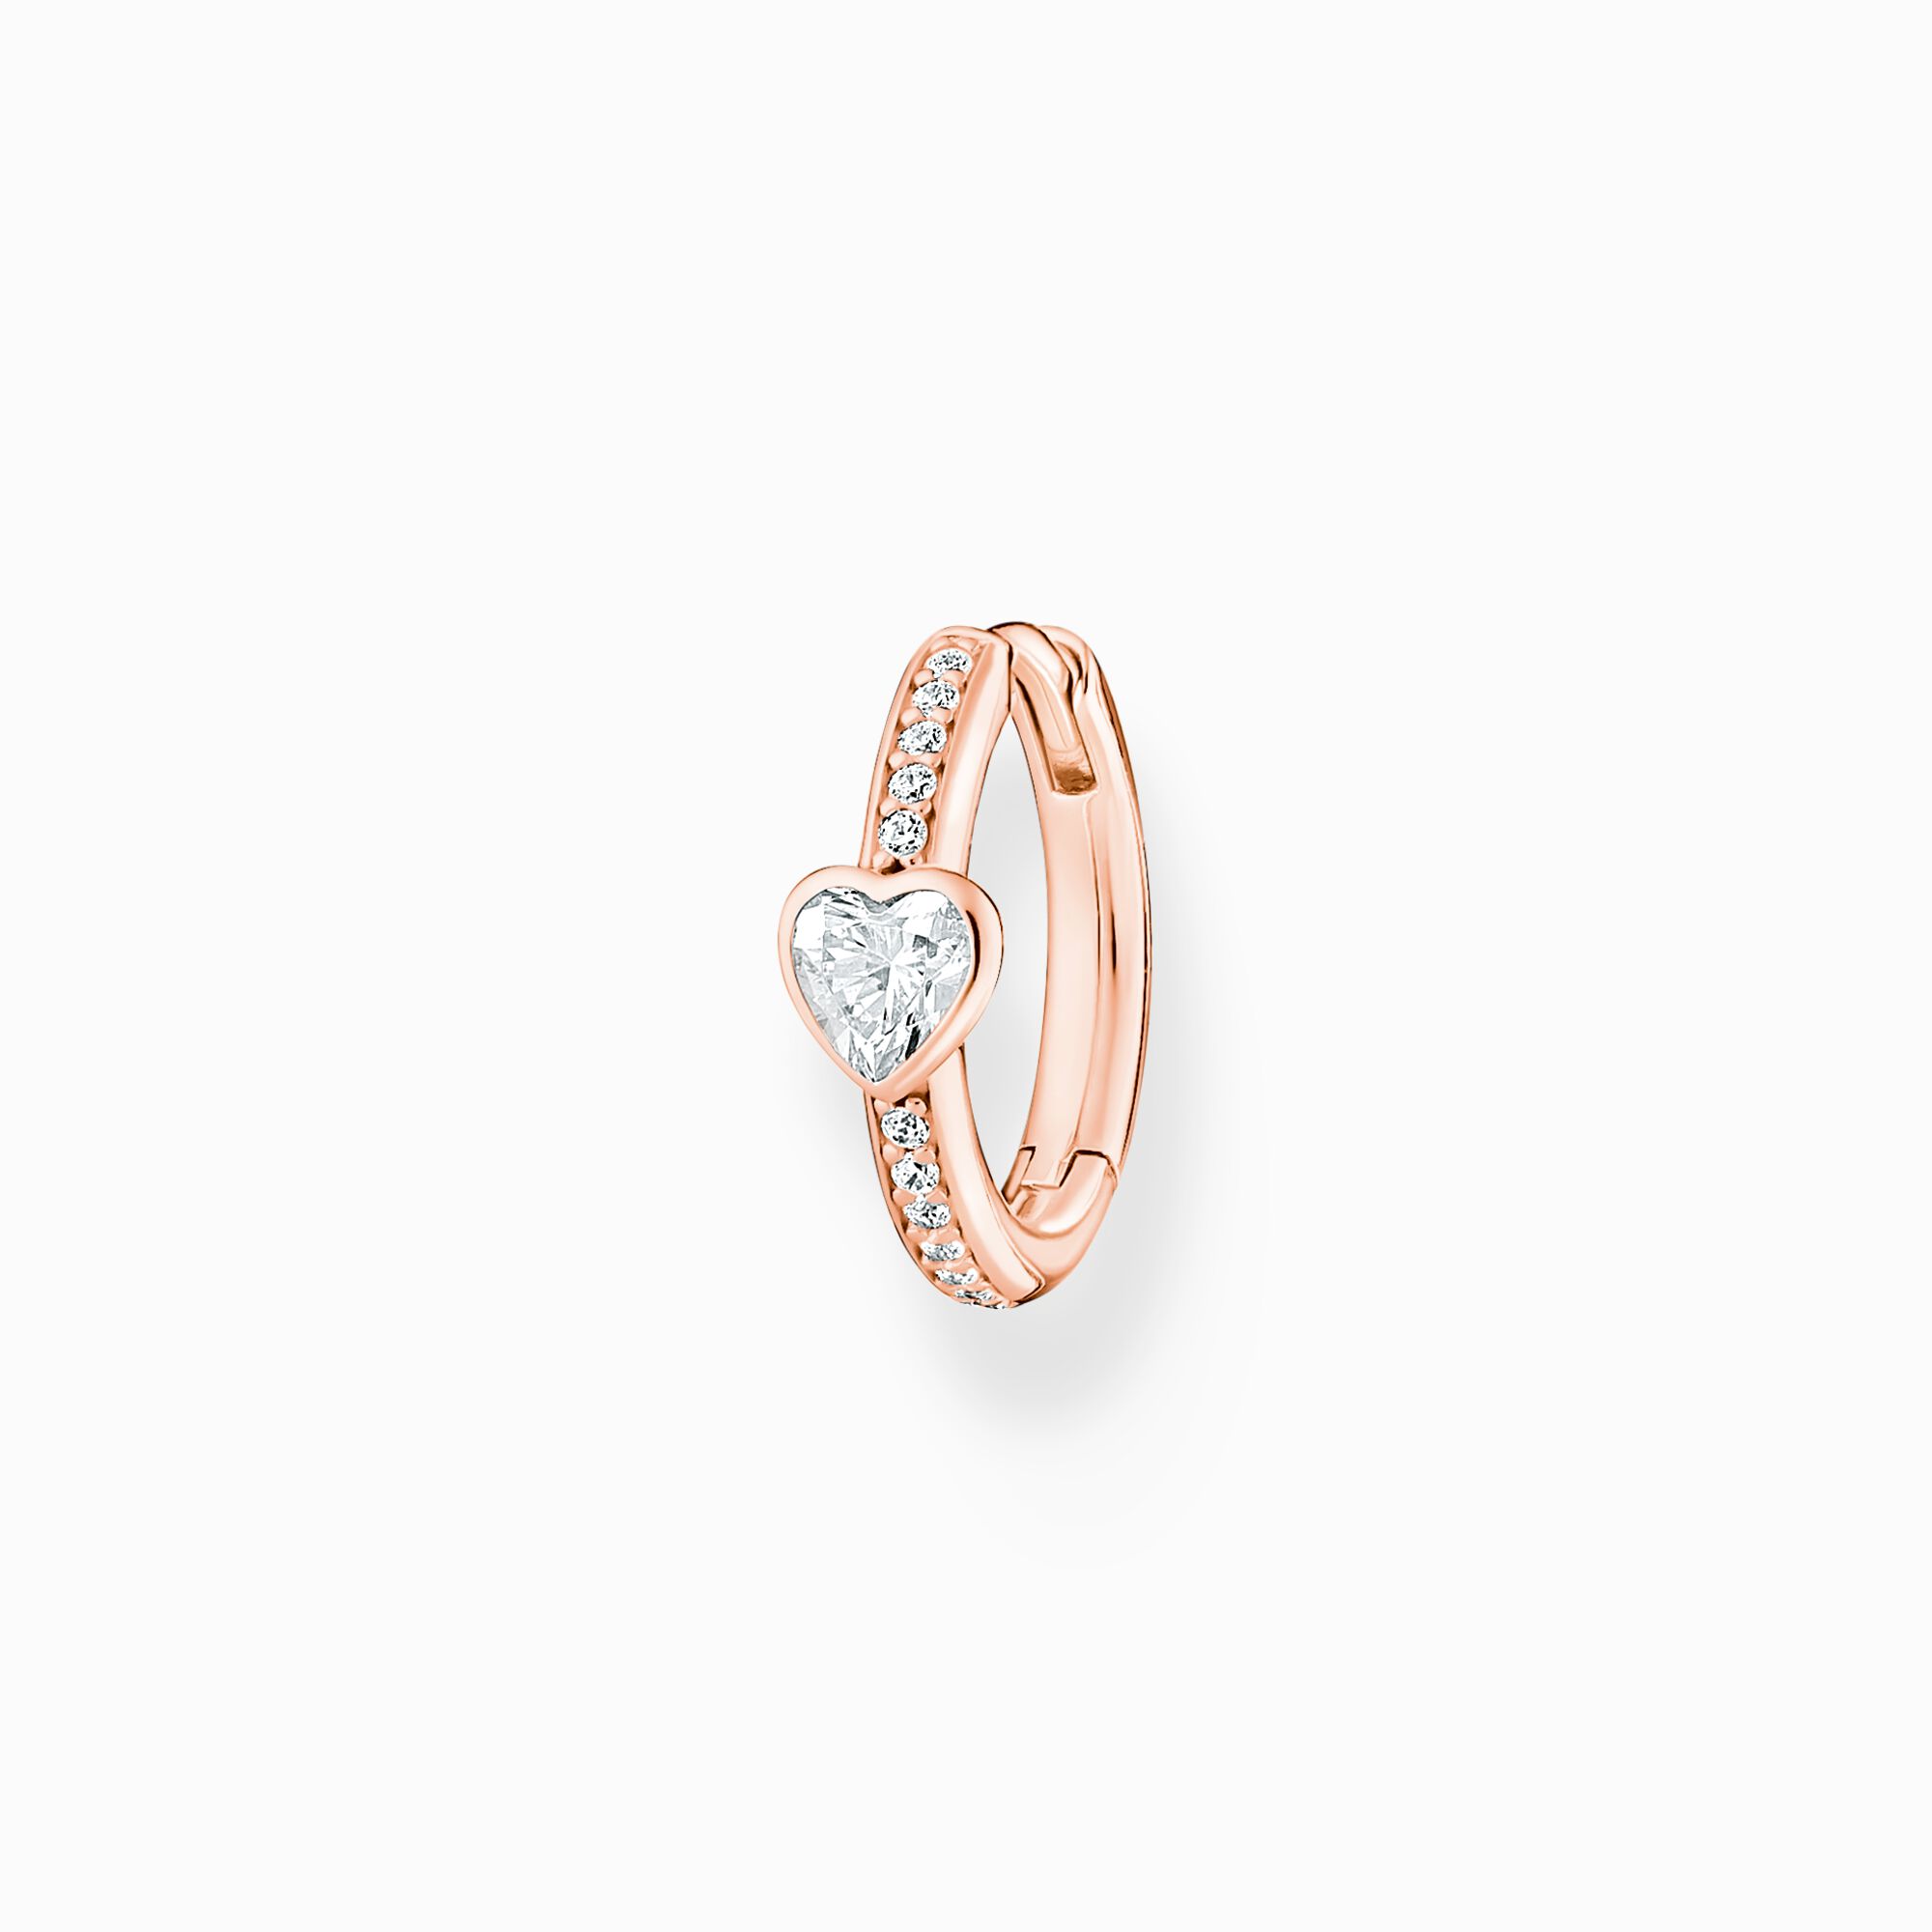 Single hoop earring with heart and white stones rose gold from the Charming Collection collection in the THOMAS SABO online store